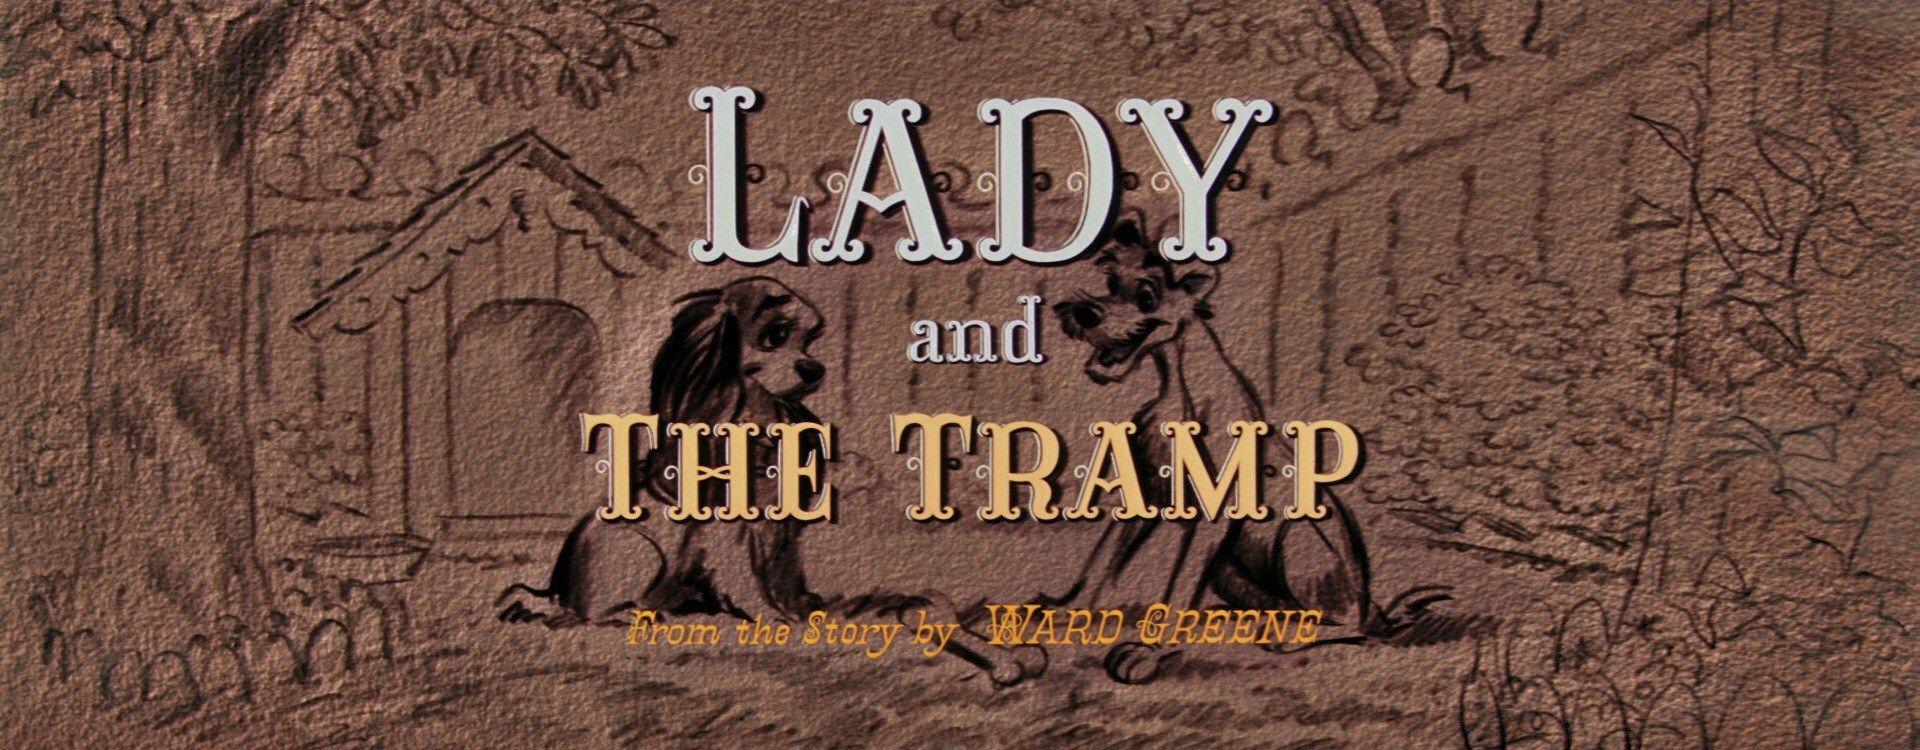 Lady and the Tramp Logo - Lady and the Tramp (1955)